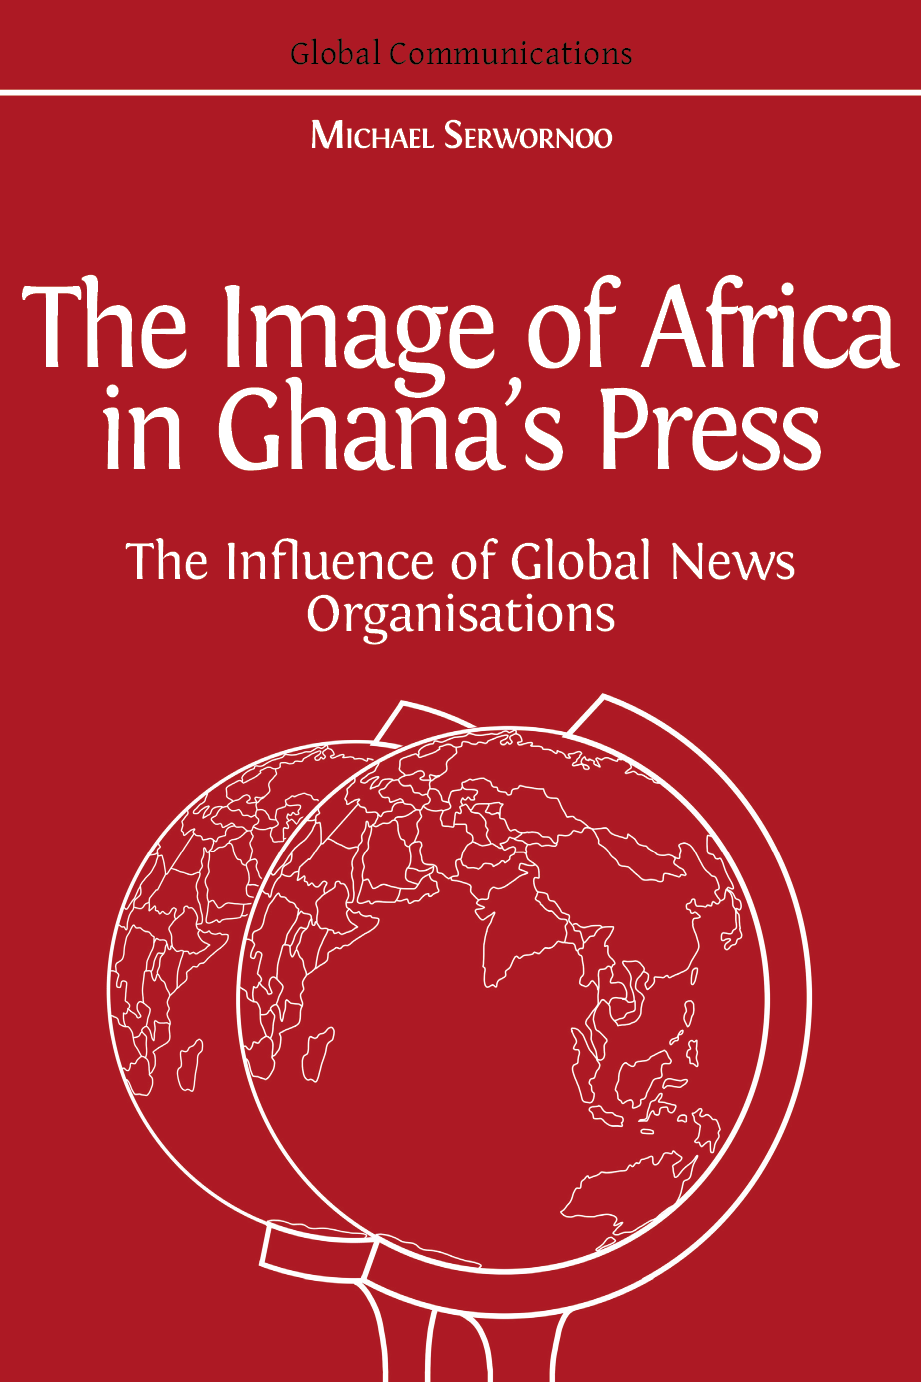 The Image of Africa in Ghana’s Press book cover image